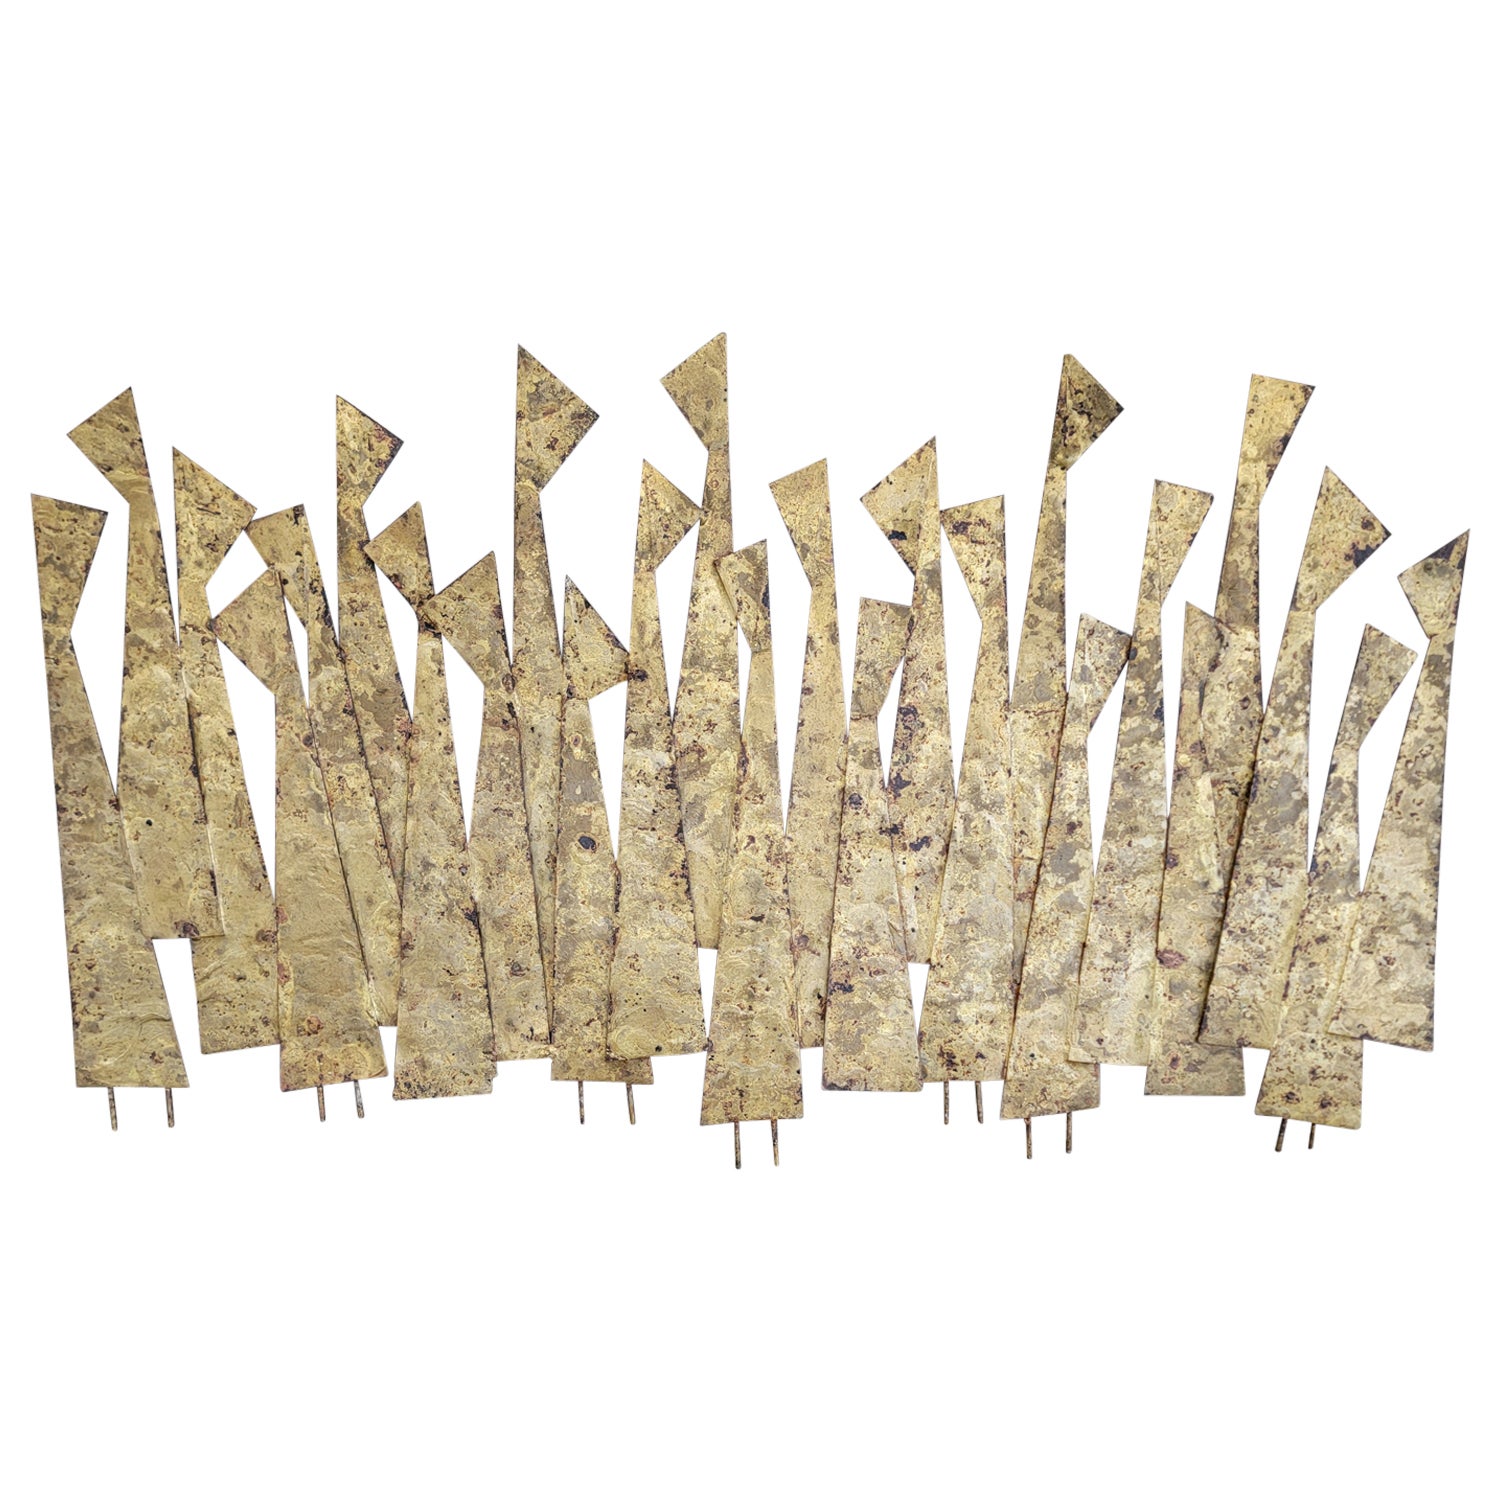 Peter Pepper Abstract Brutalist Wall Sculpture Titled "People" For Sale